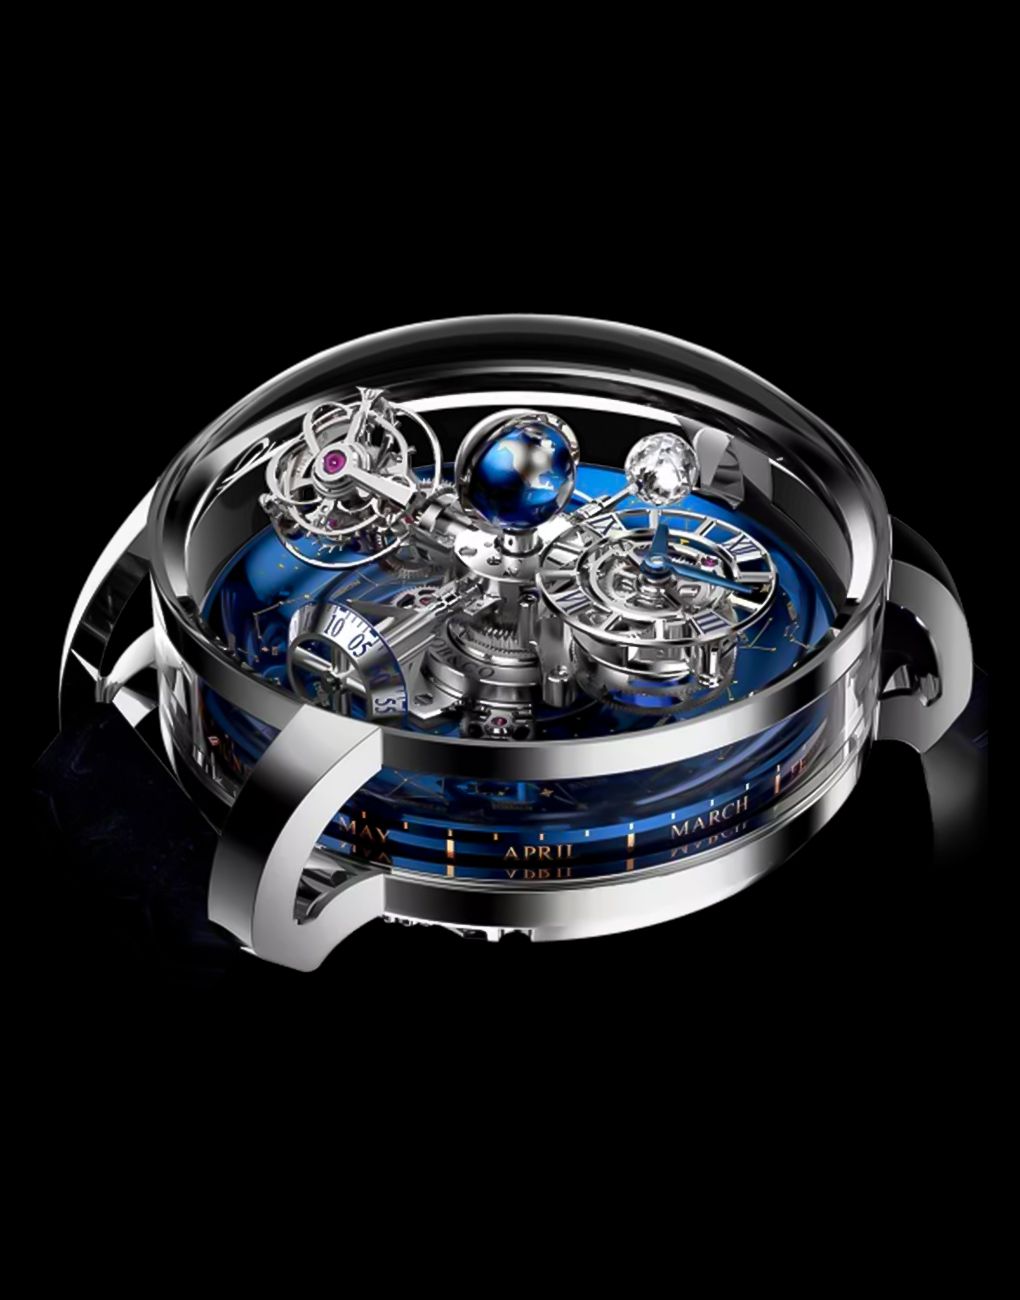 Jacob & Co. ASTRONOMIA CASINO (Limited of 88 pieces)